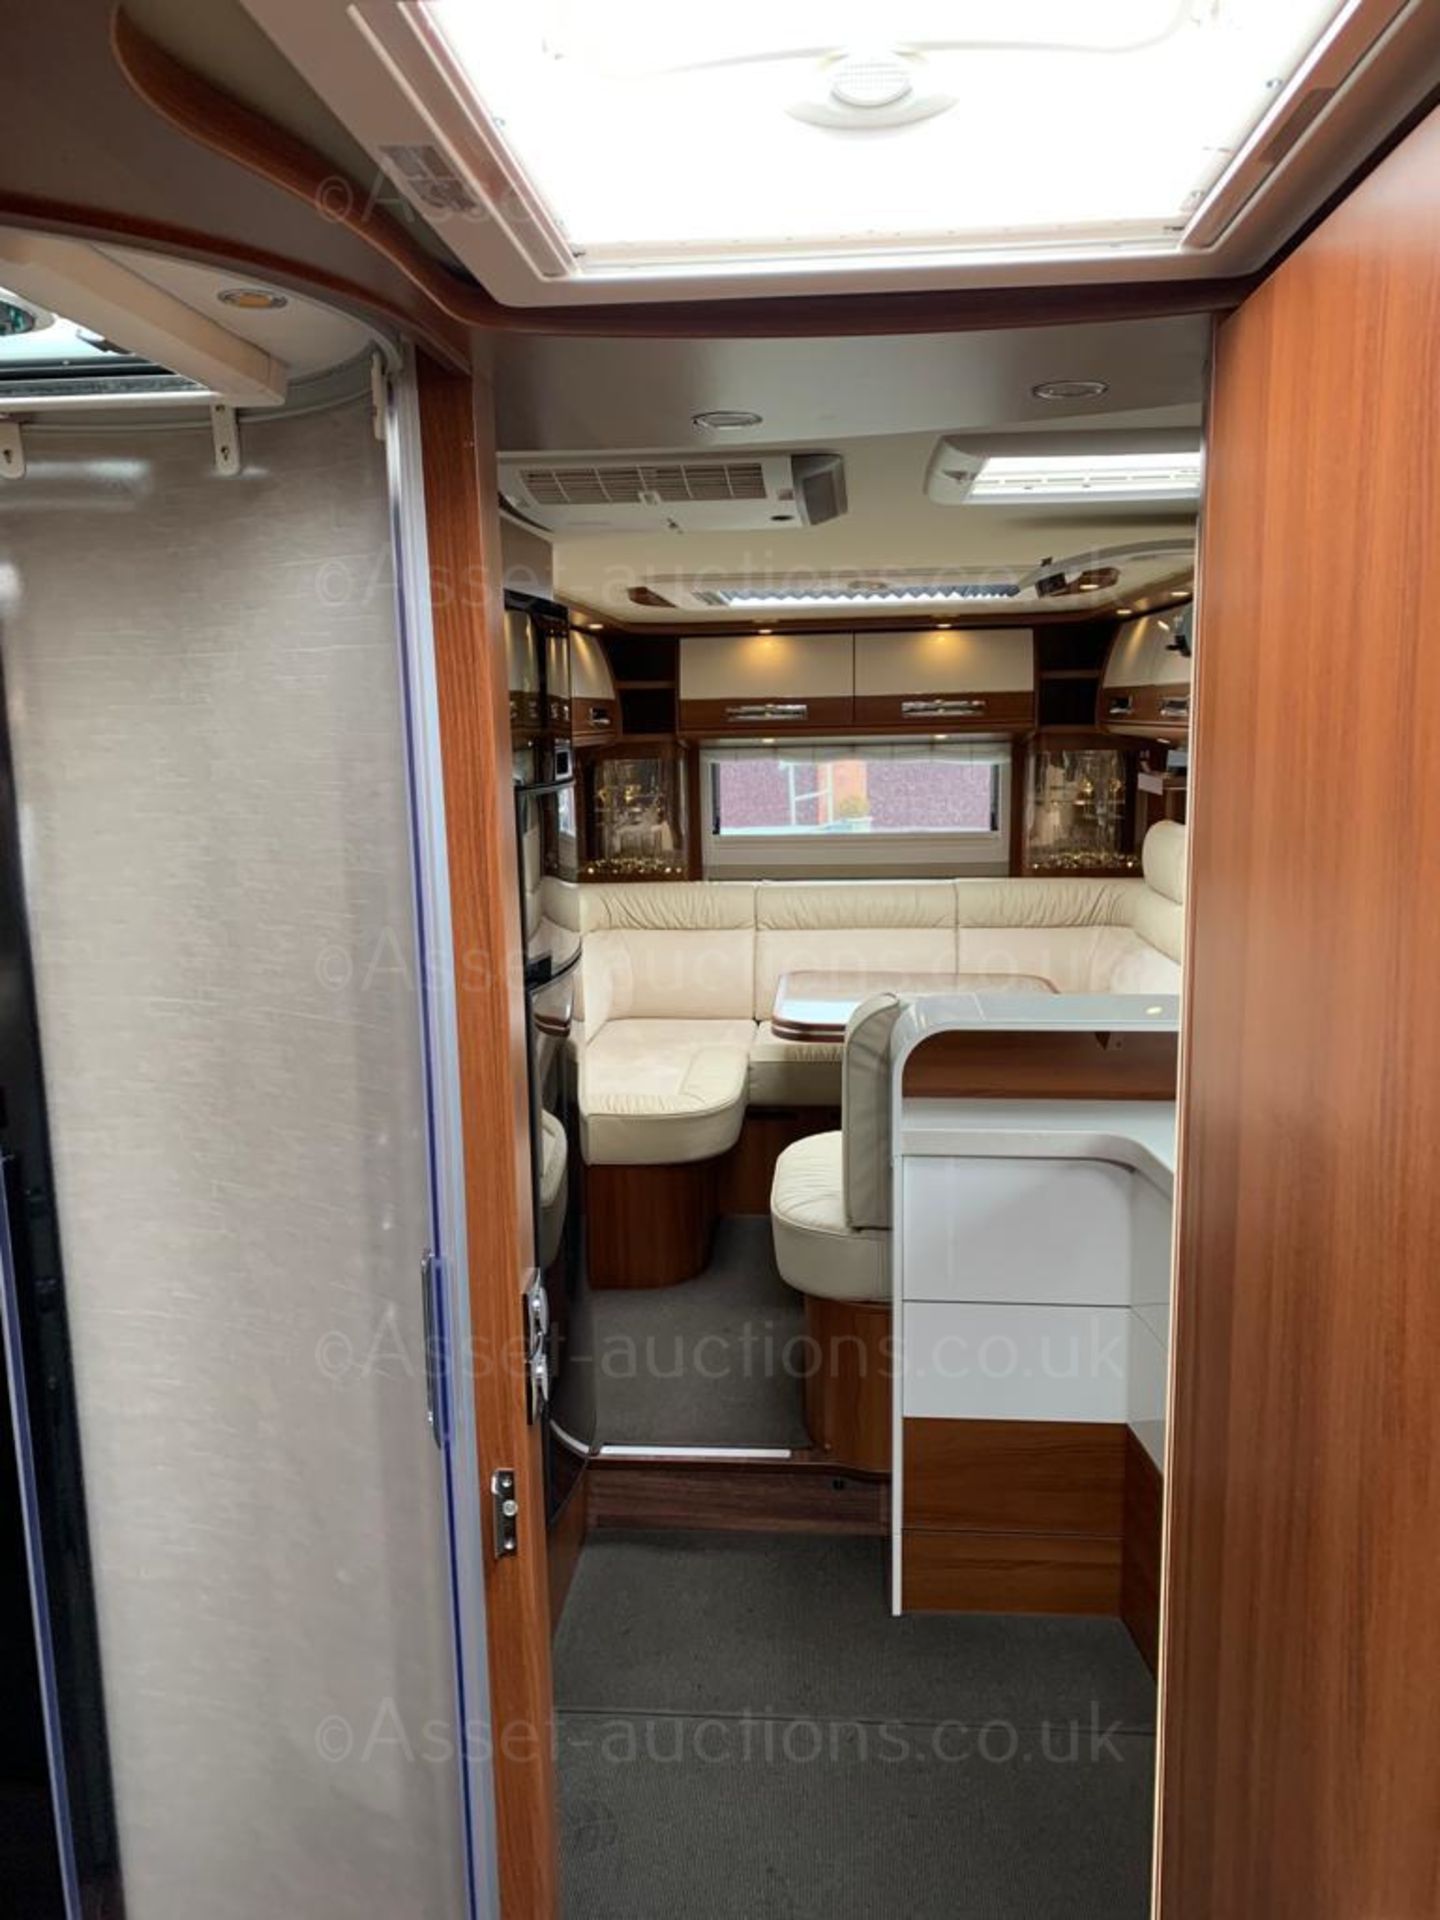 2020 CARTHAGO LINER-FOR-TWO 53L MOTORHOME, SHOWING 4529 MILES, MINT CONDITION *NO VAT* - Image 24 of 33